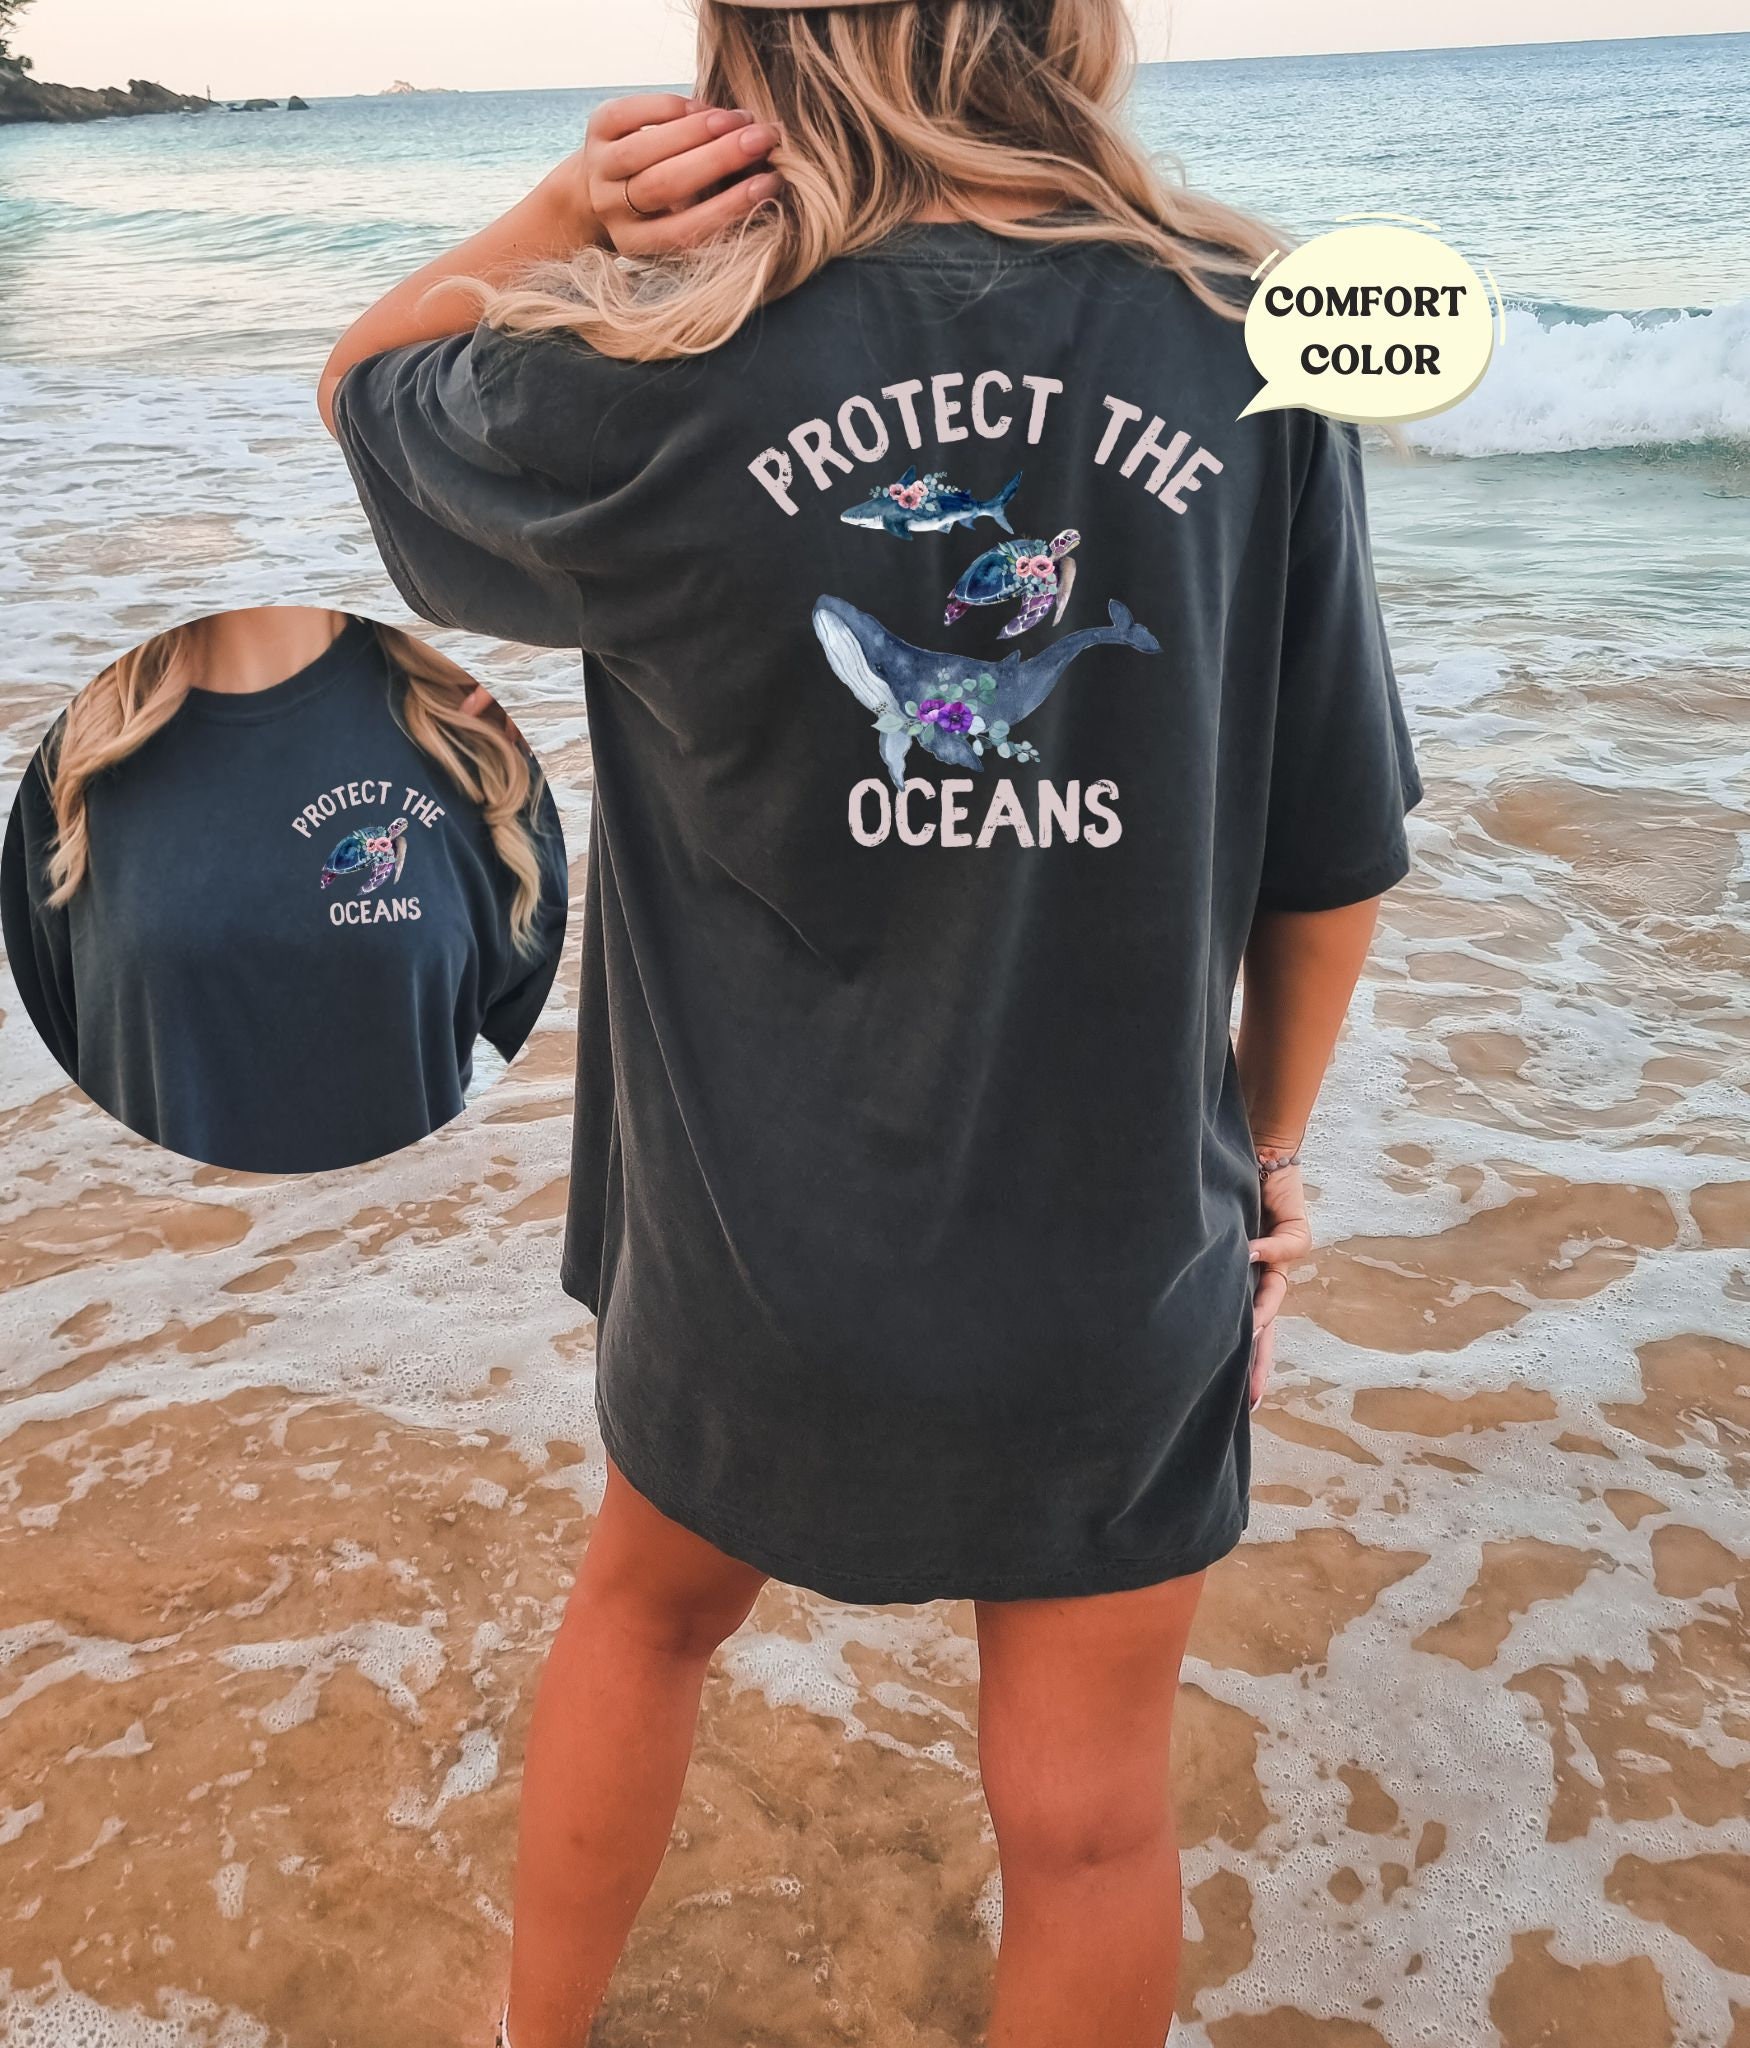 Save the Ocean Shirt Protect Our Oceans Tshirt Respect the Local